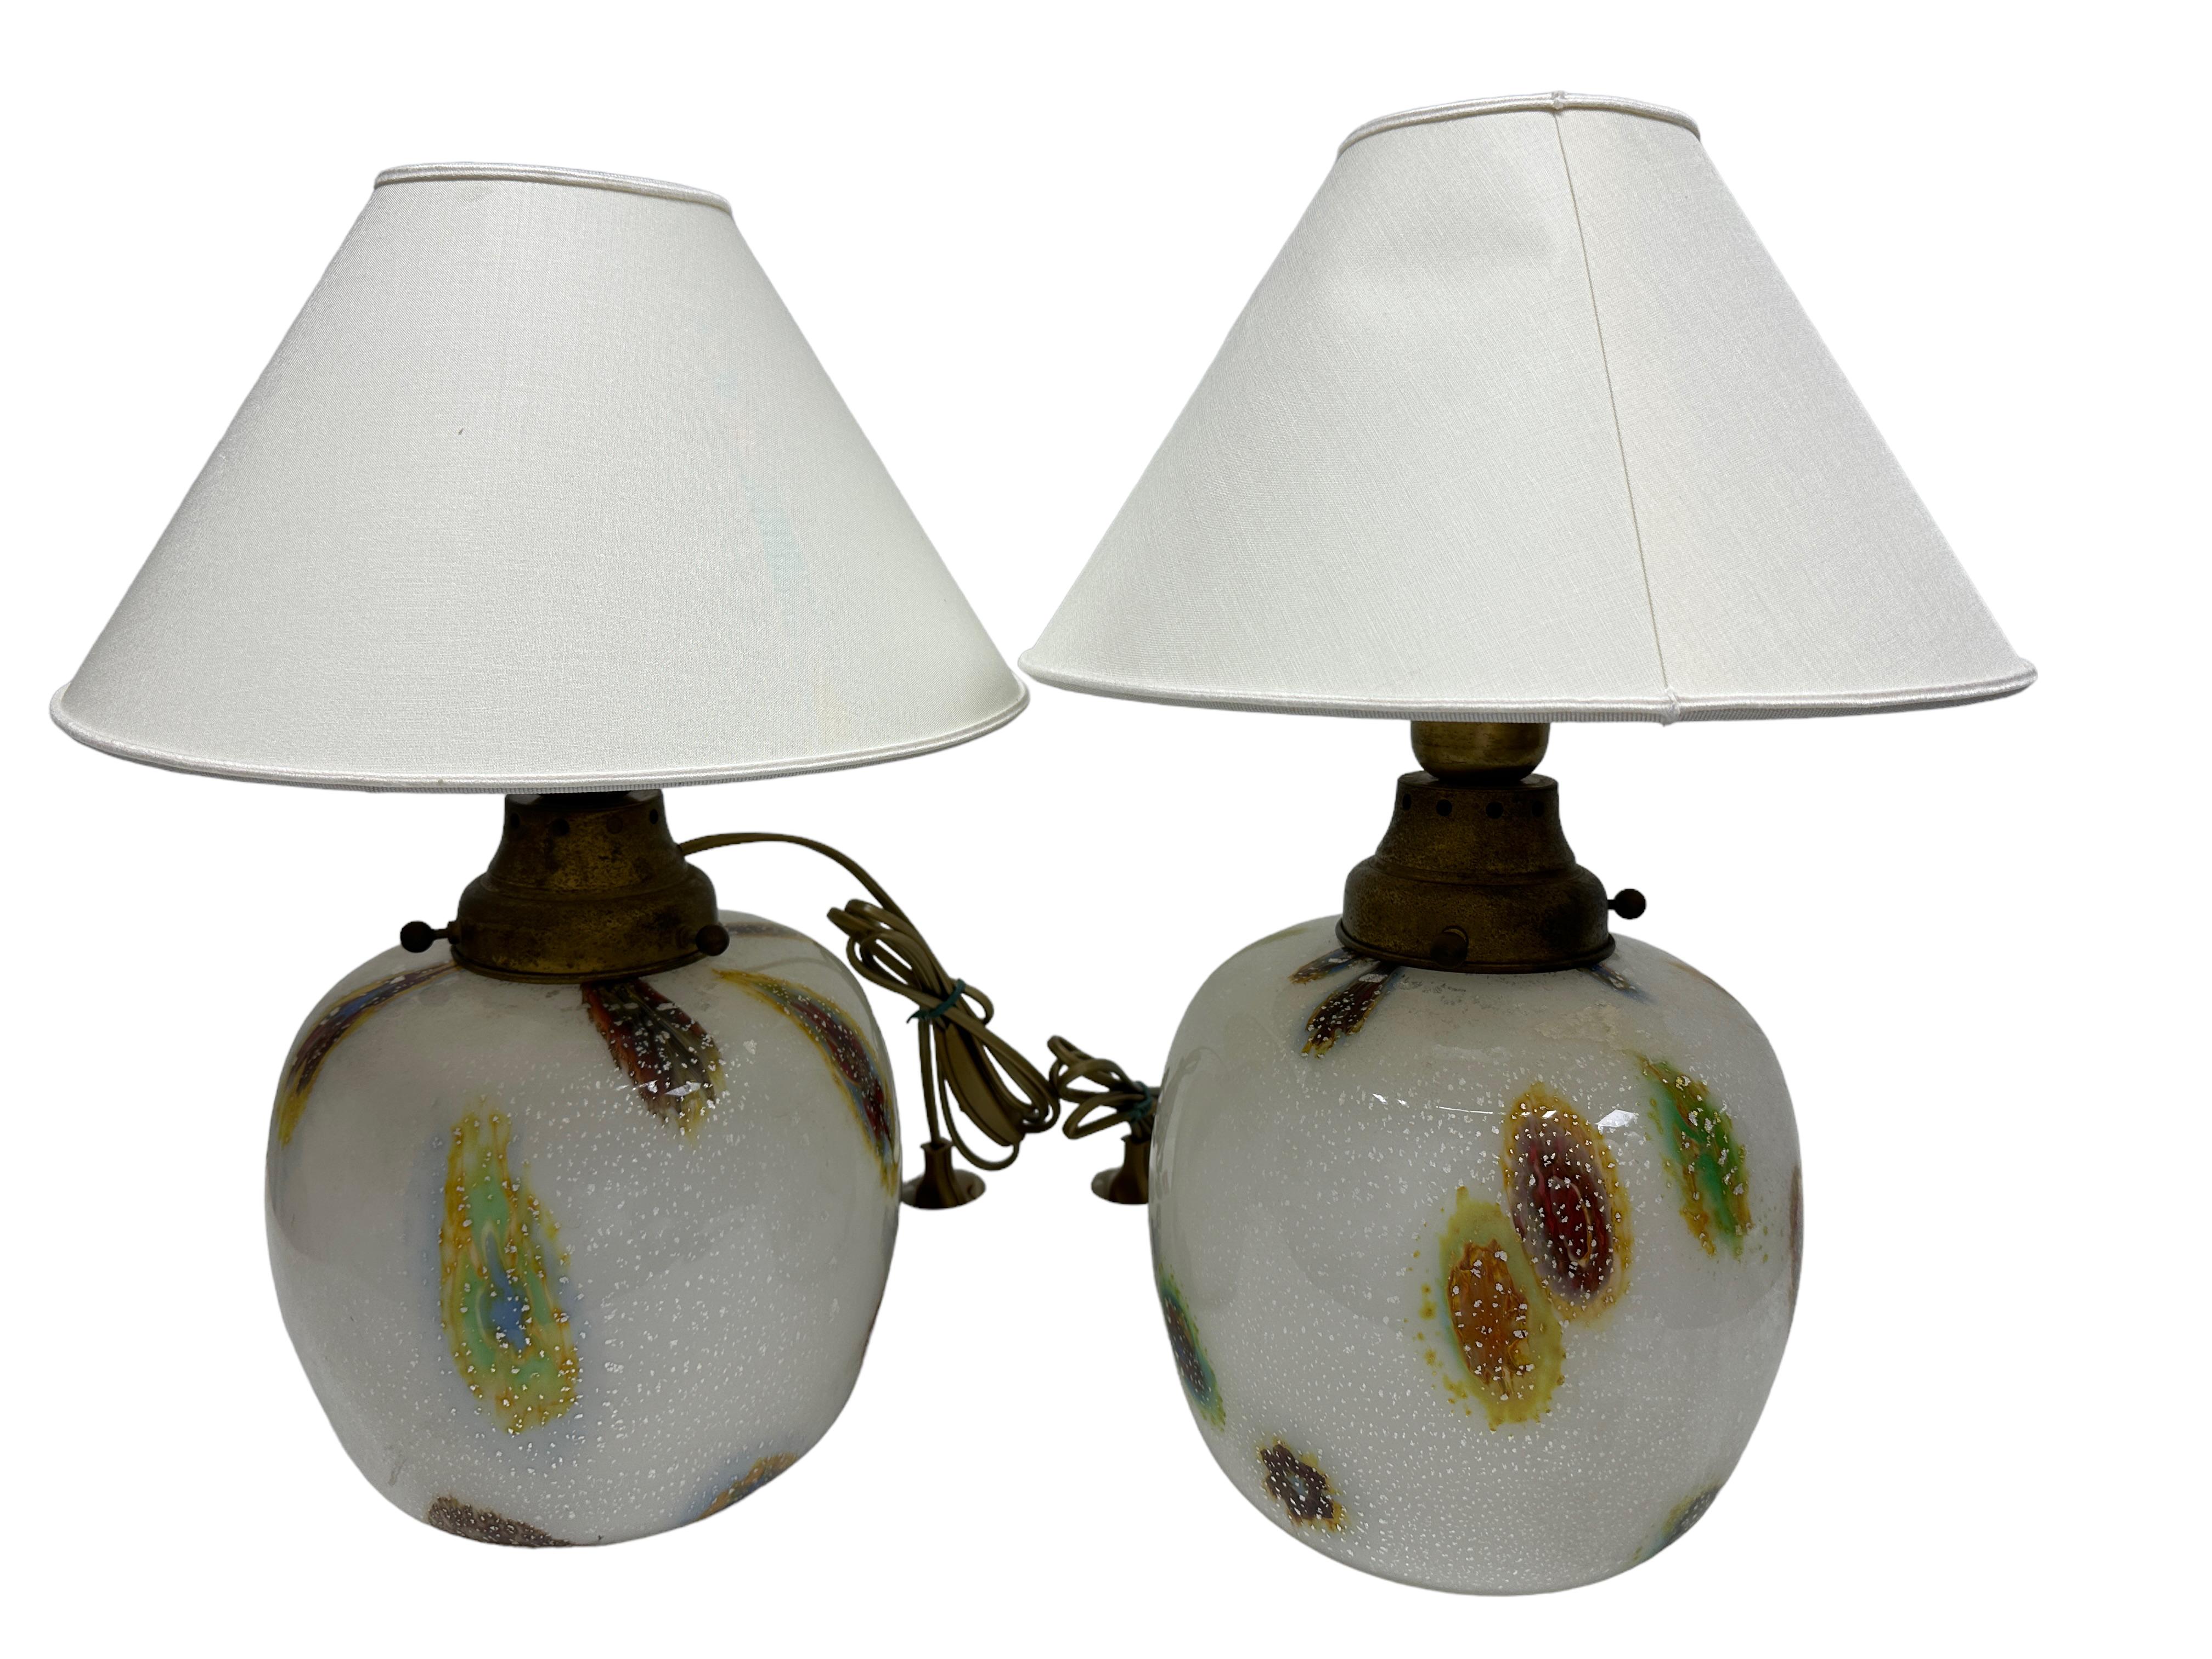 Pair of Table Lamp in Murano Glass by Dino Martens and Aureliano Toso, 1960 For Sale 7